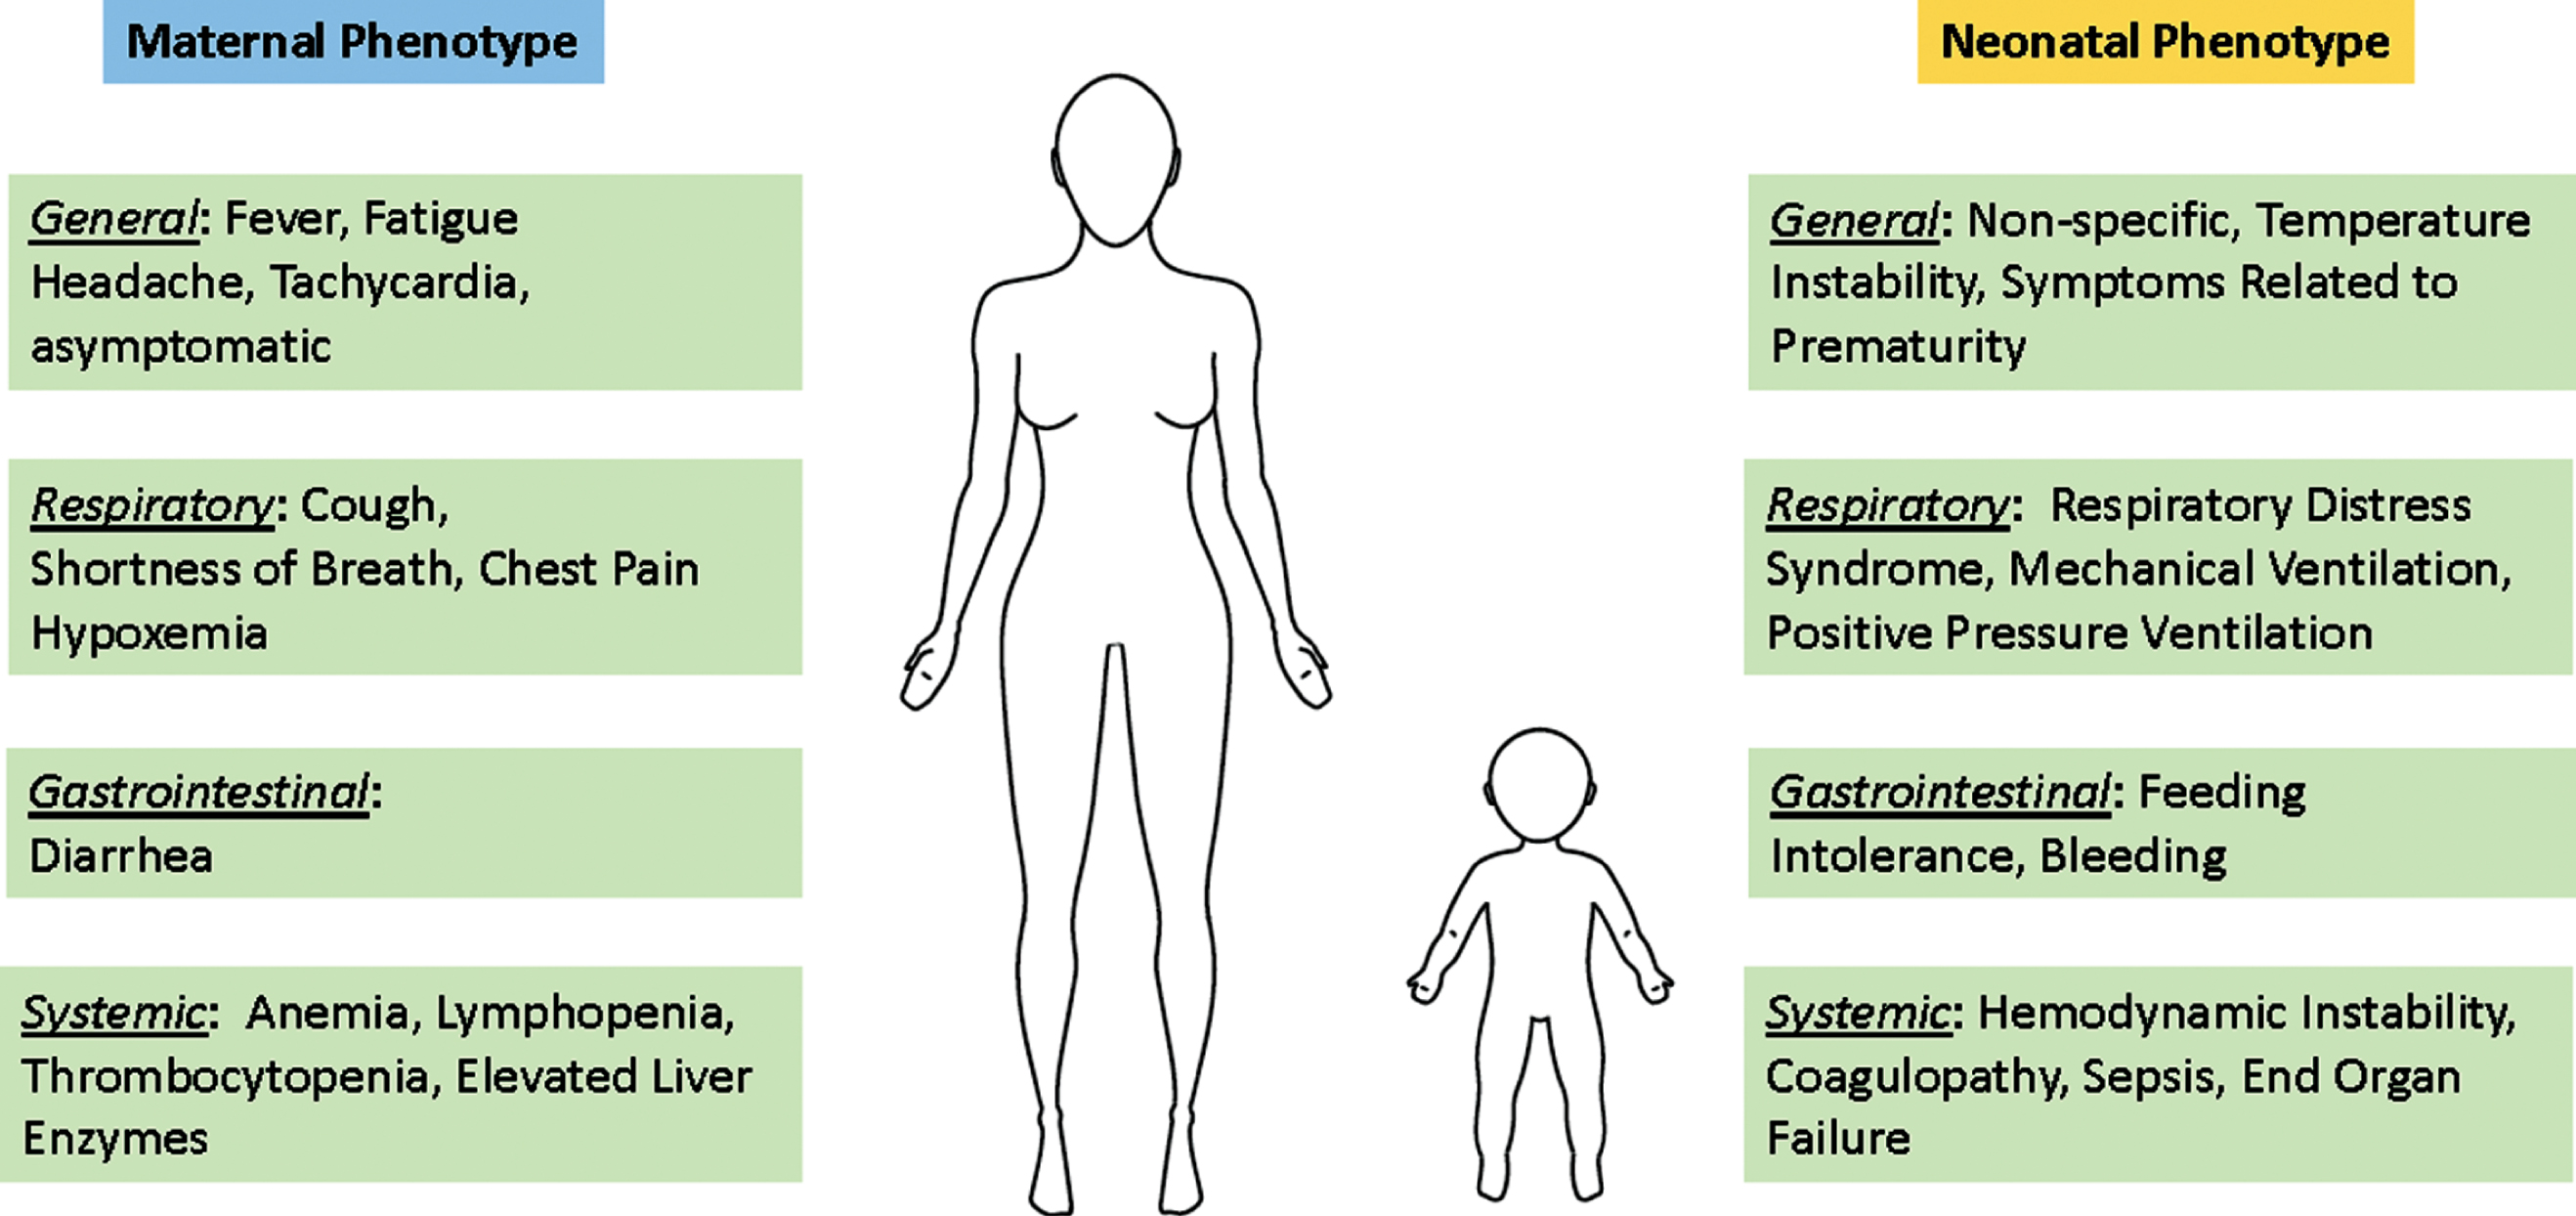 Symptomatology of obstetric and neonatal COVID-19 infection. Maternal symptoms have been reported as like the general population. Neonatal symptoms have been reported, but it important to note that distinguishing the phenotype and separating the etiology of the symptoms as specific to COVID-19, rather than bacterial infection or prematurity, has yet to occur.